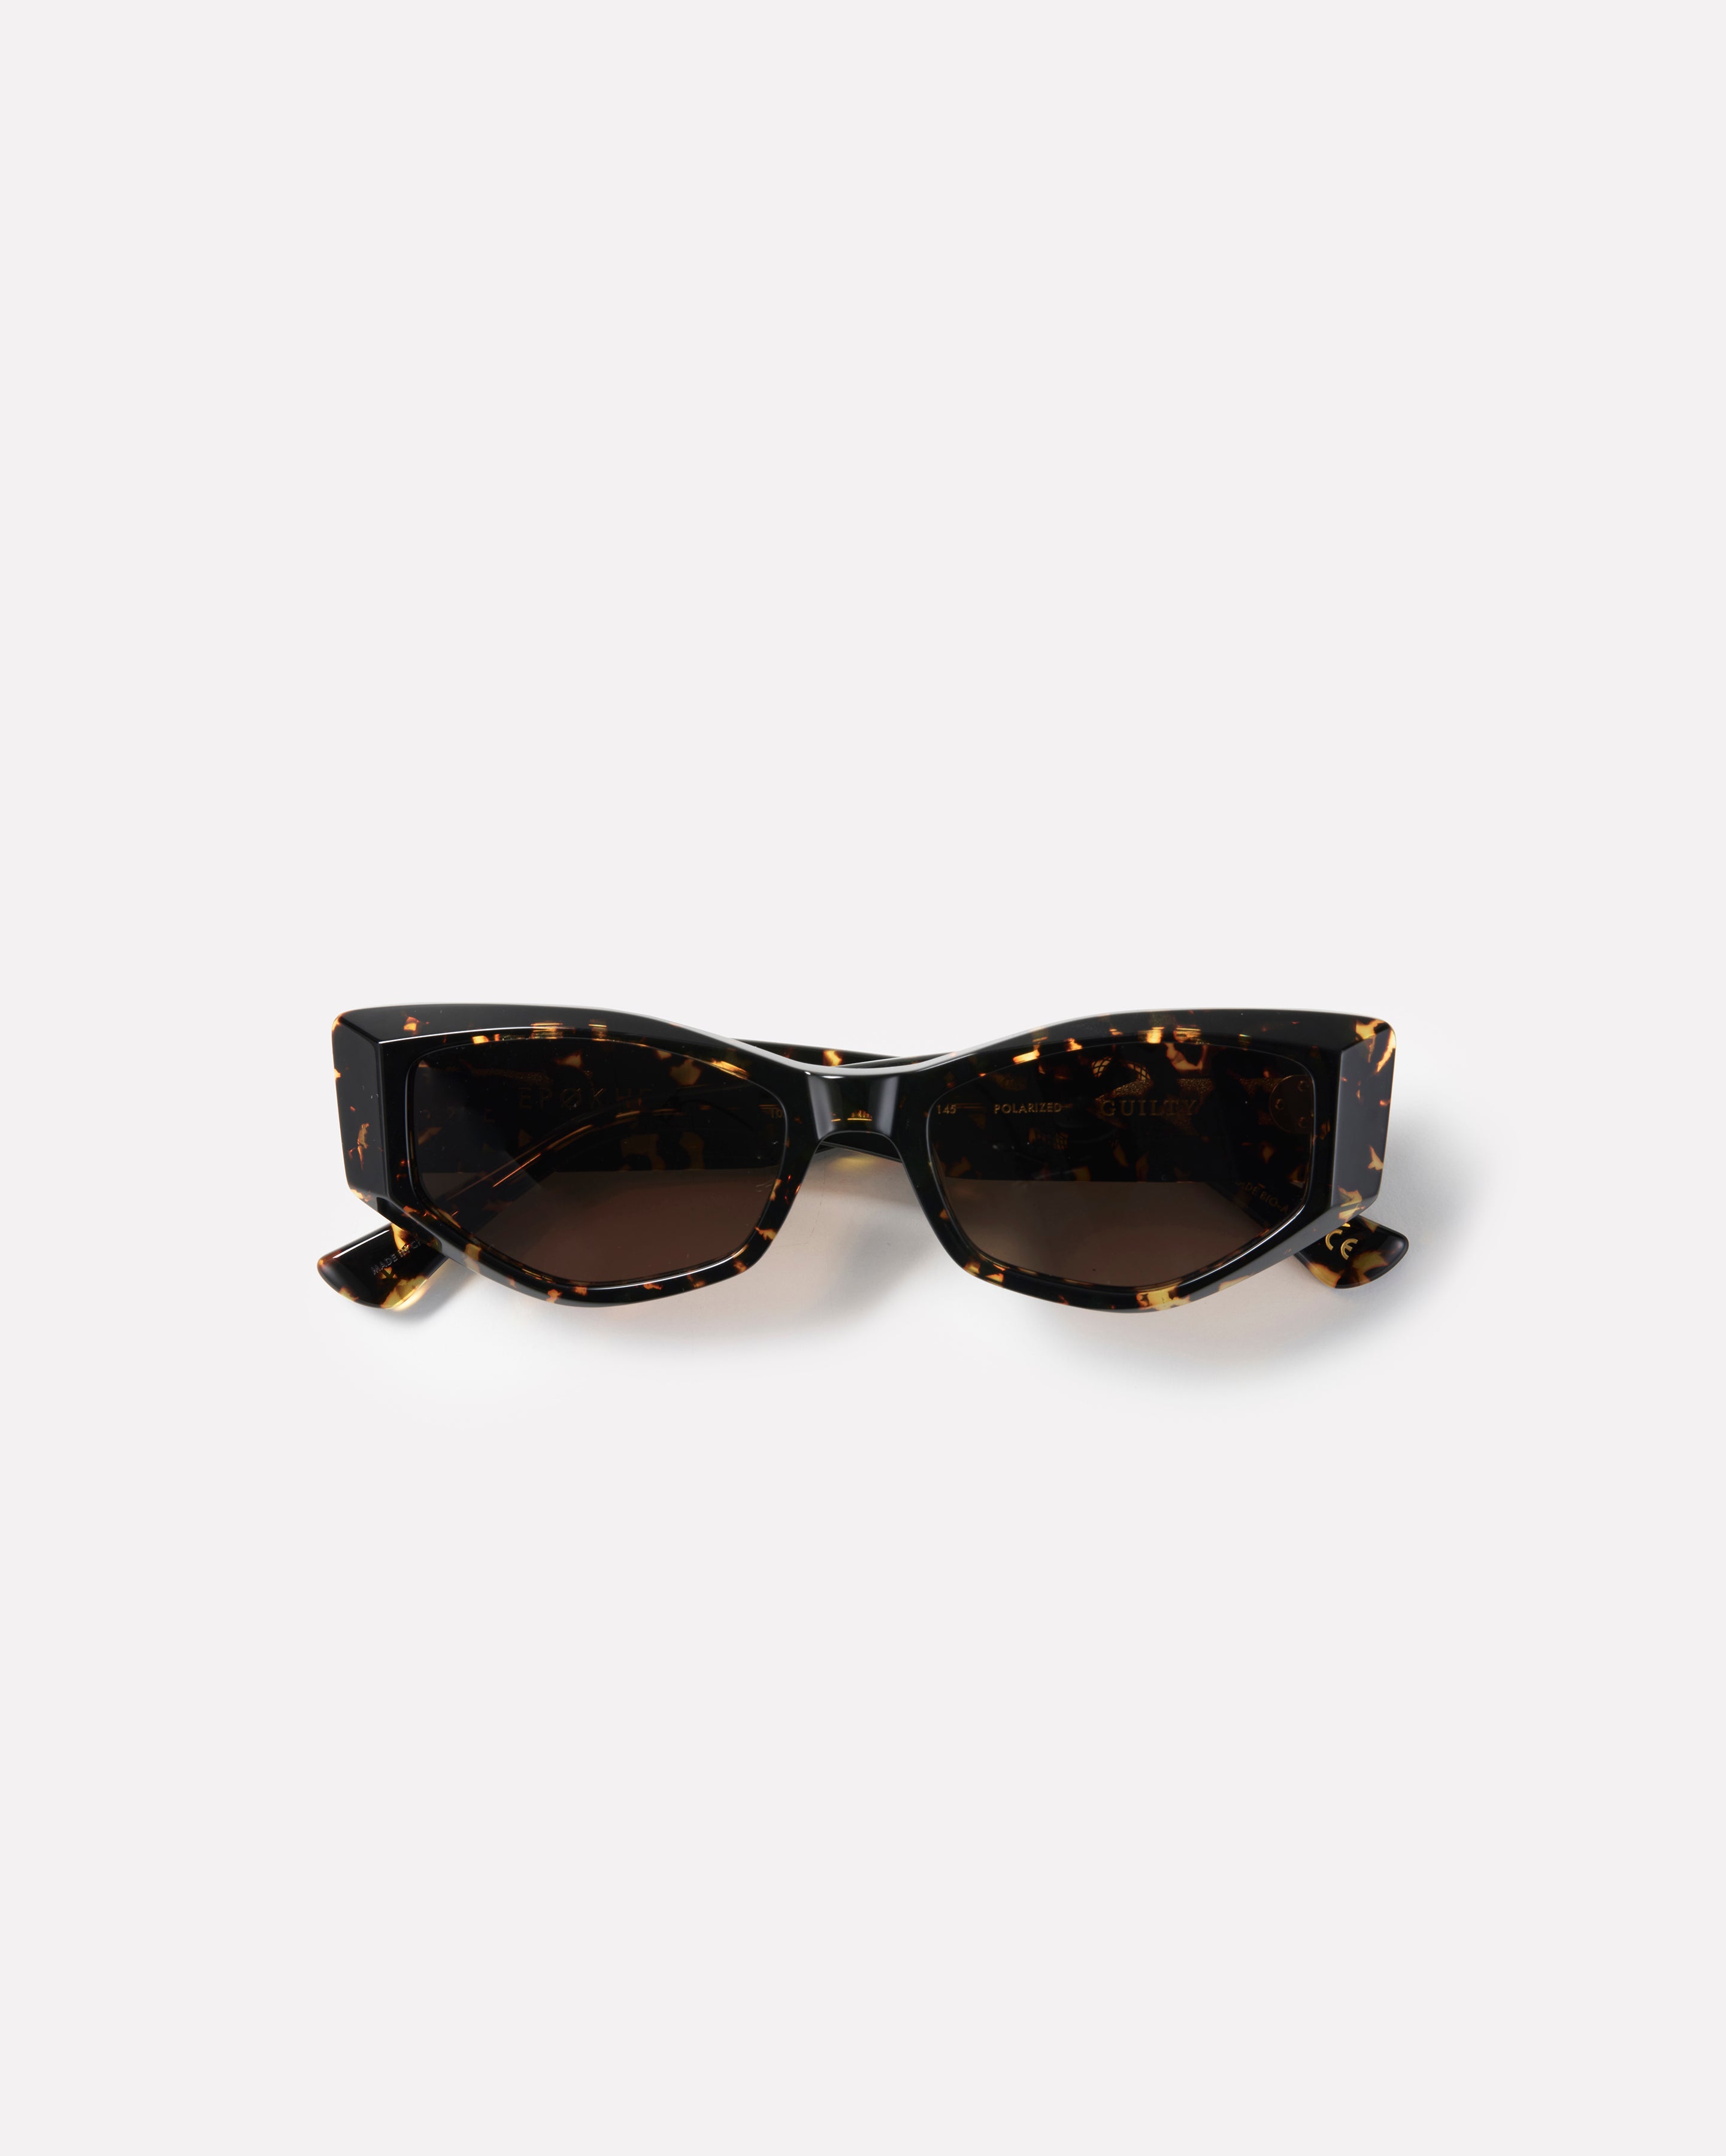 Guilty - Crystal Dark Tortoise Polished / Brown Polarized